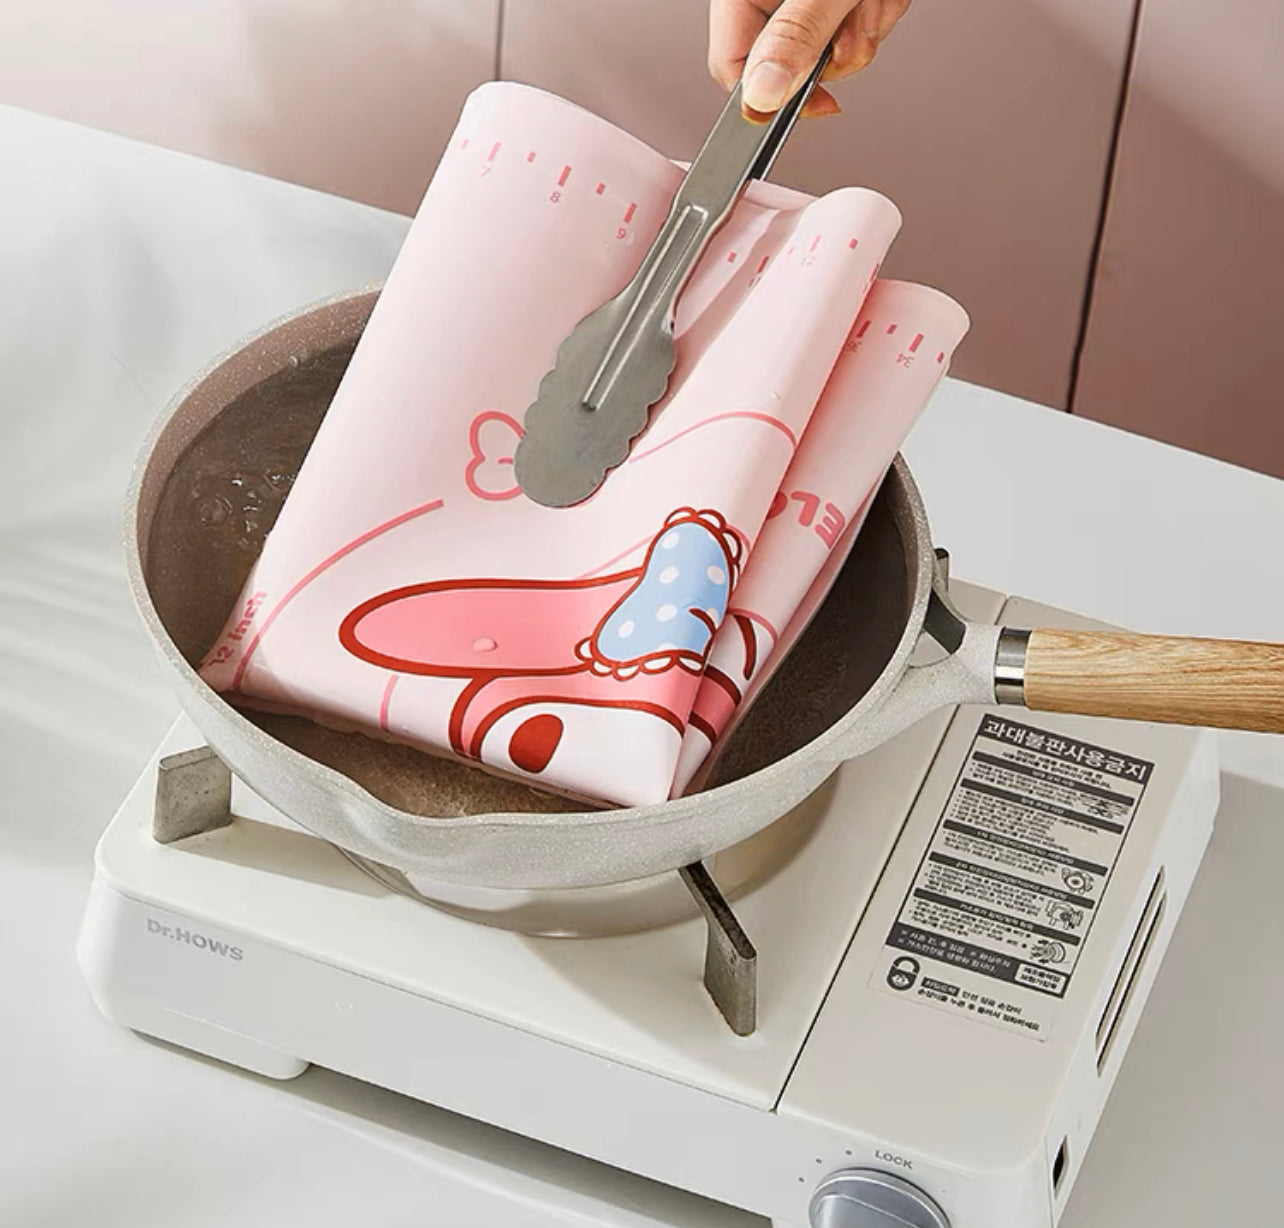 My melody and cinnamon roll baking tools